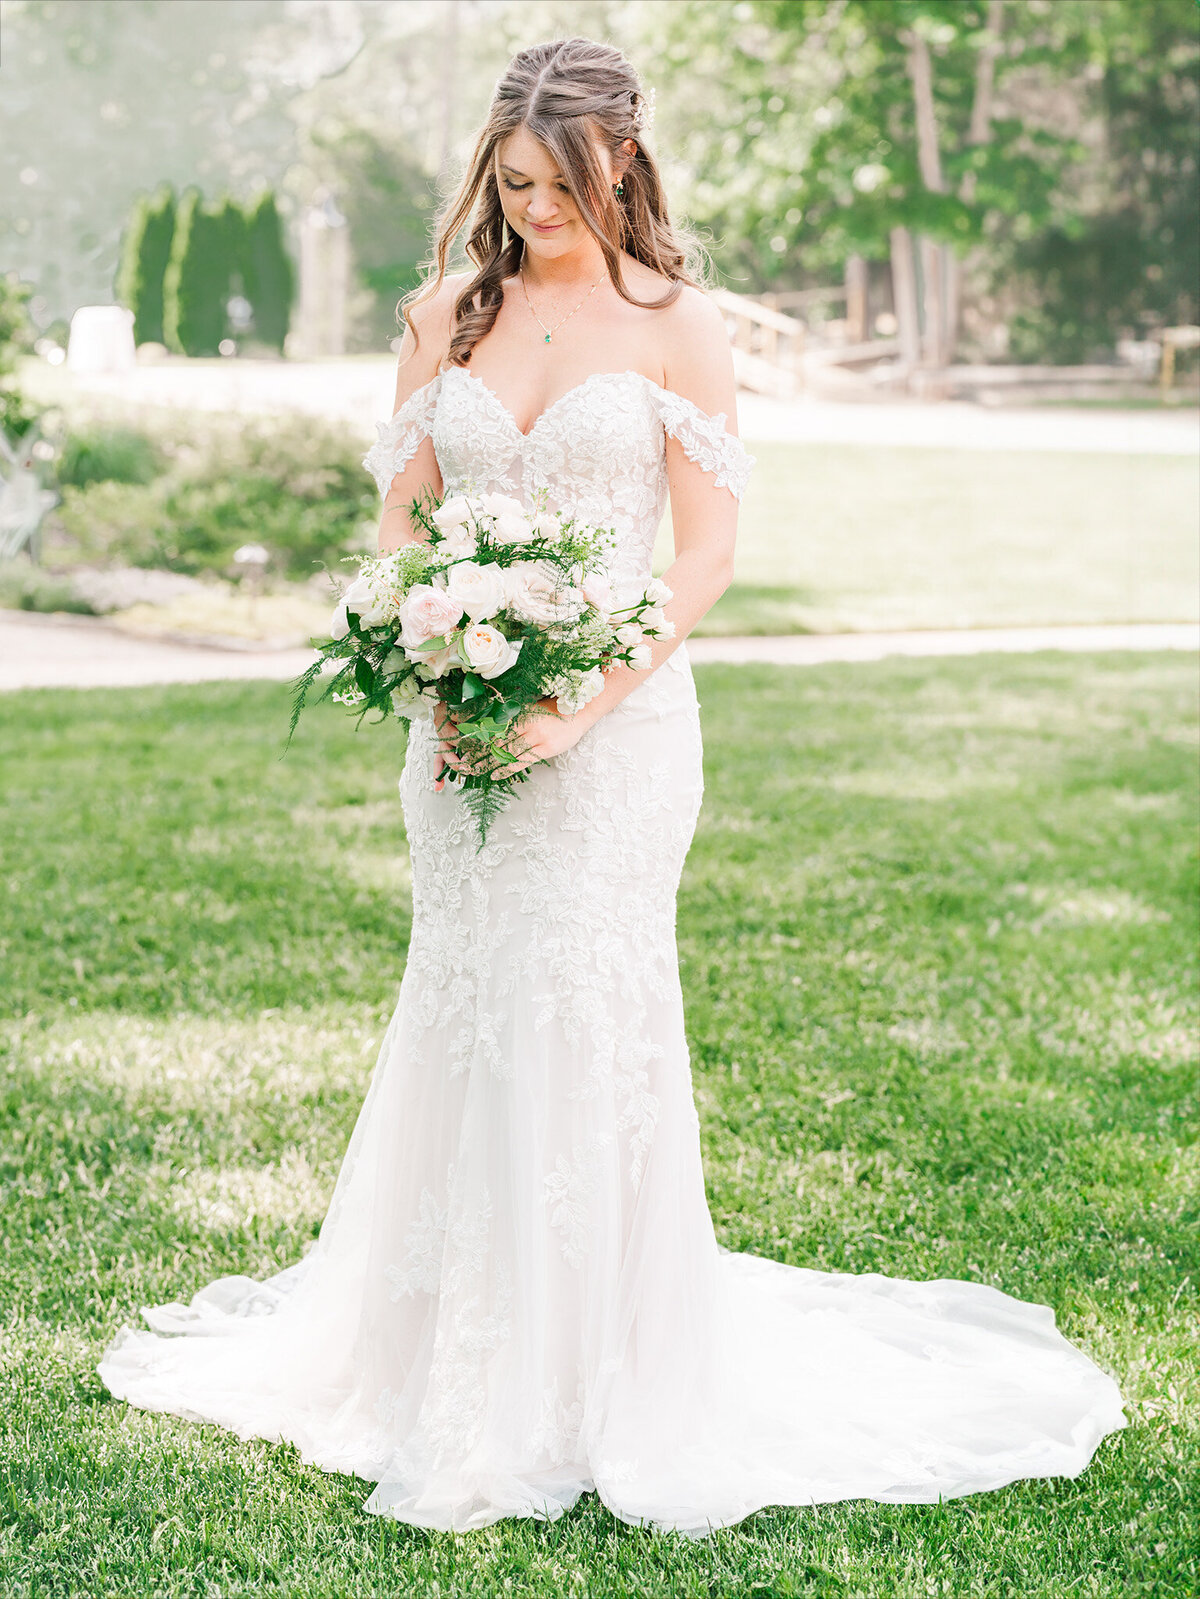 A brunette bride holding her wedding bouquet at the Angus Barn for her bridal portrait session with JoLynn Photography, a North Carolina wedding photographer